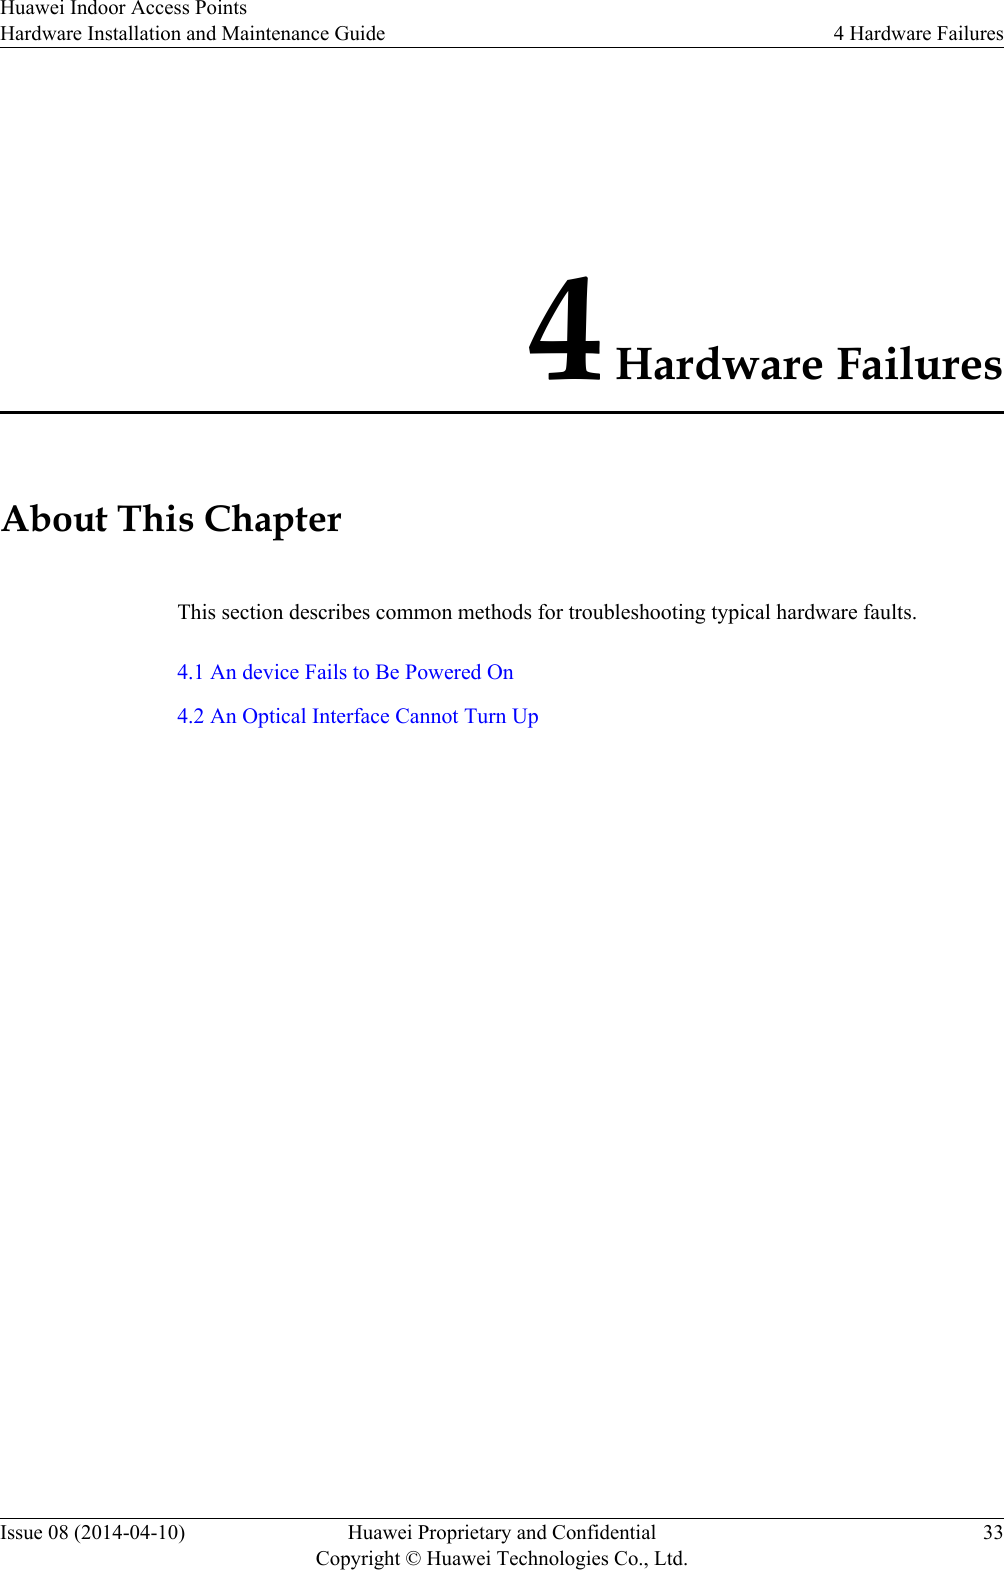 4 Hardware FailuresAbout This ChapterThis section describes common methods for troubleshooting typical hardware faults.4.1 An device Fails to Be Powered On4.2 An Optical Interface Cannot Turn UpHuawei Indoor Access PointsHardware Installation and Maintenance Guide 4 Hardware FailuresIssue 08 (2014-04-10) Huawei Proprietary and ConfidentialCopyright © Huawei Technologies Co., Ltd.33